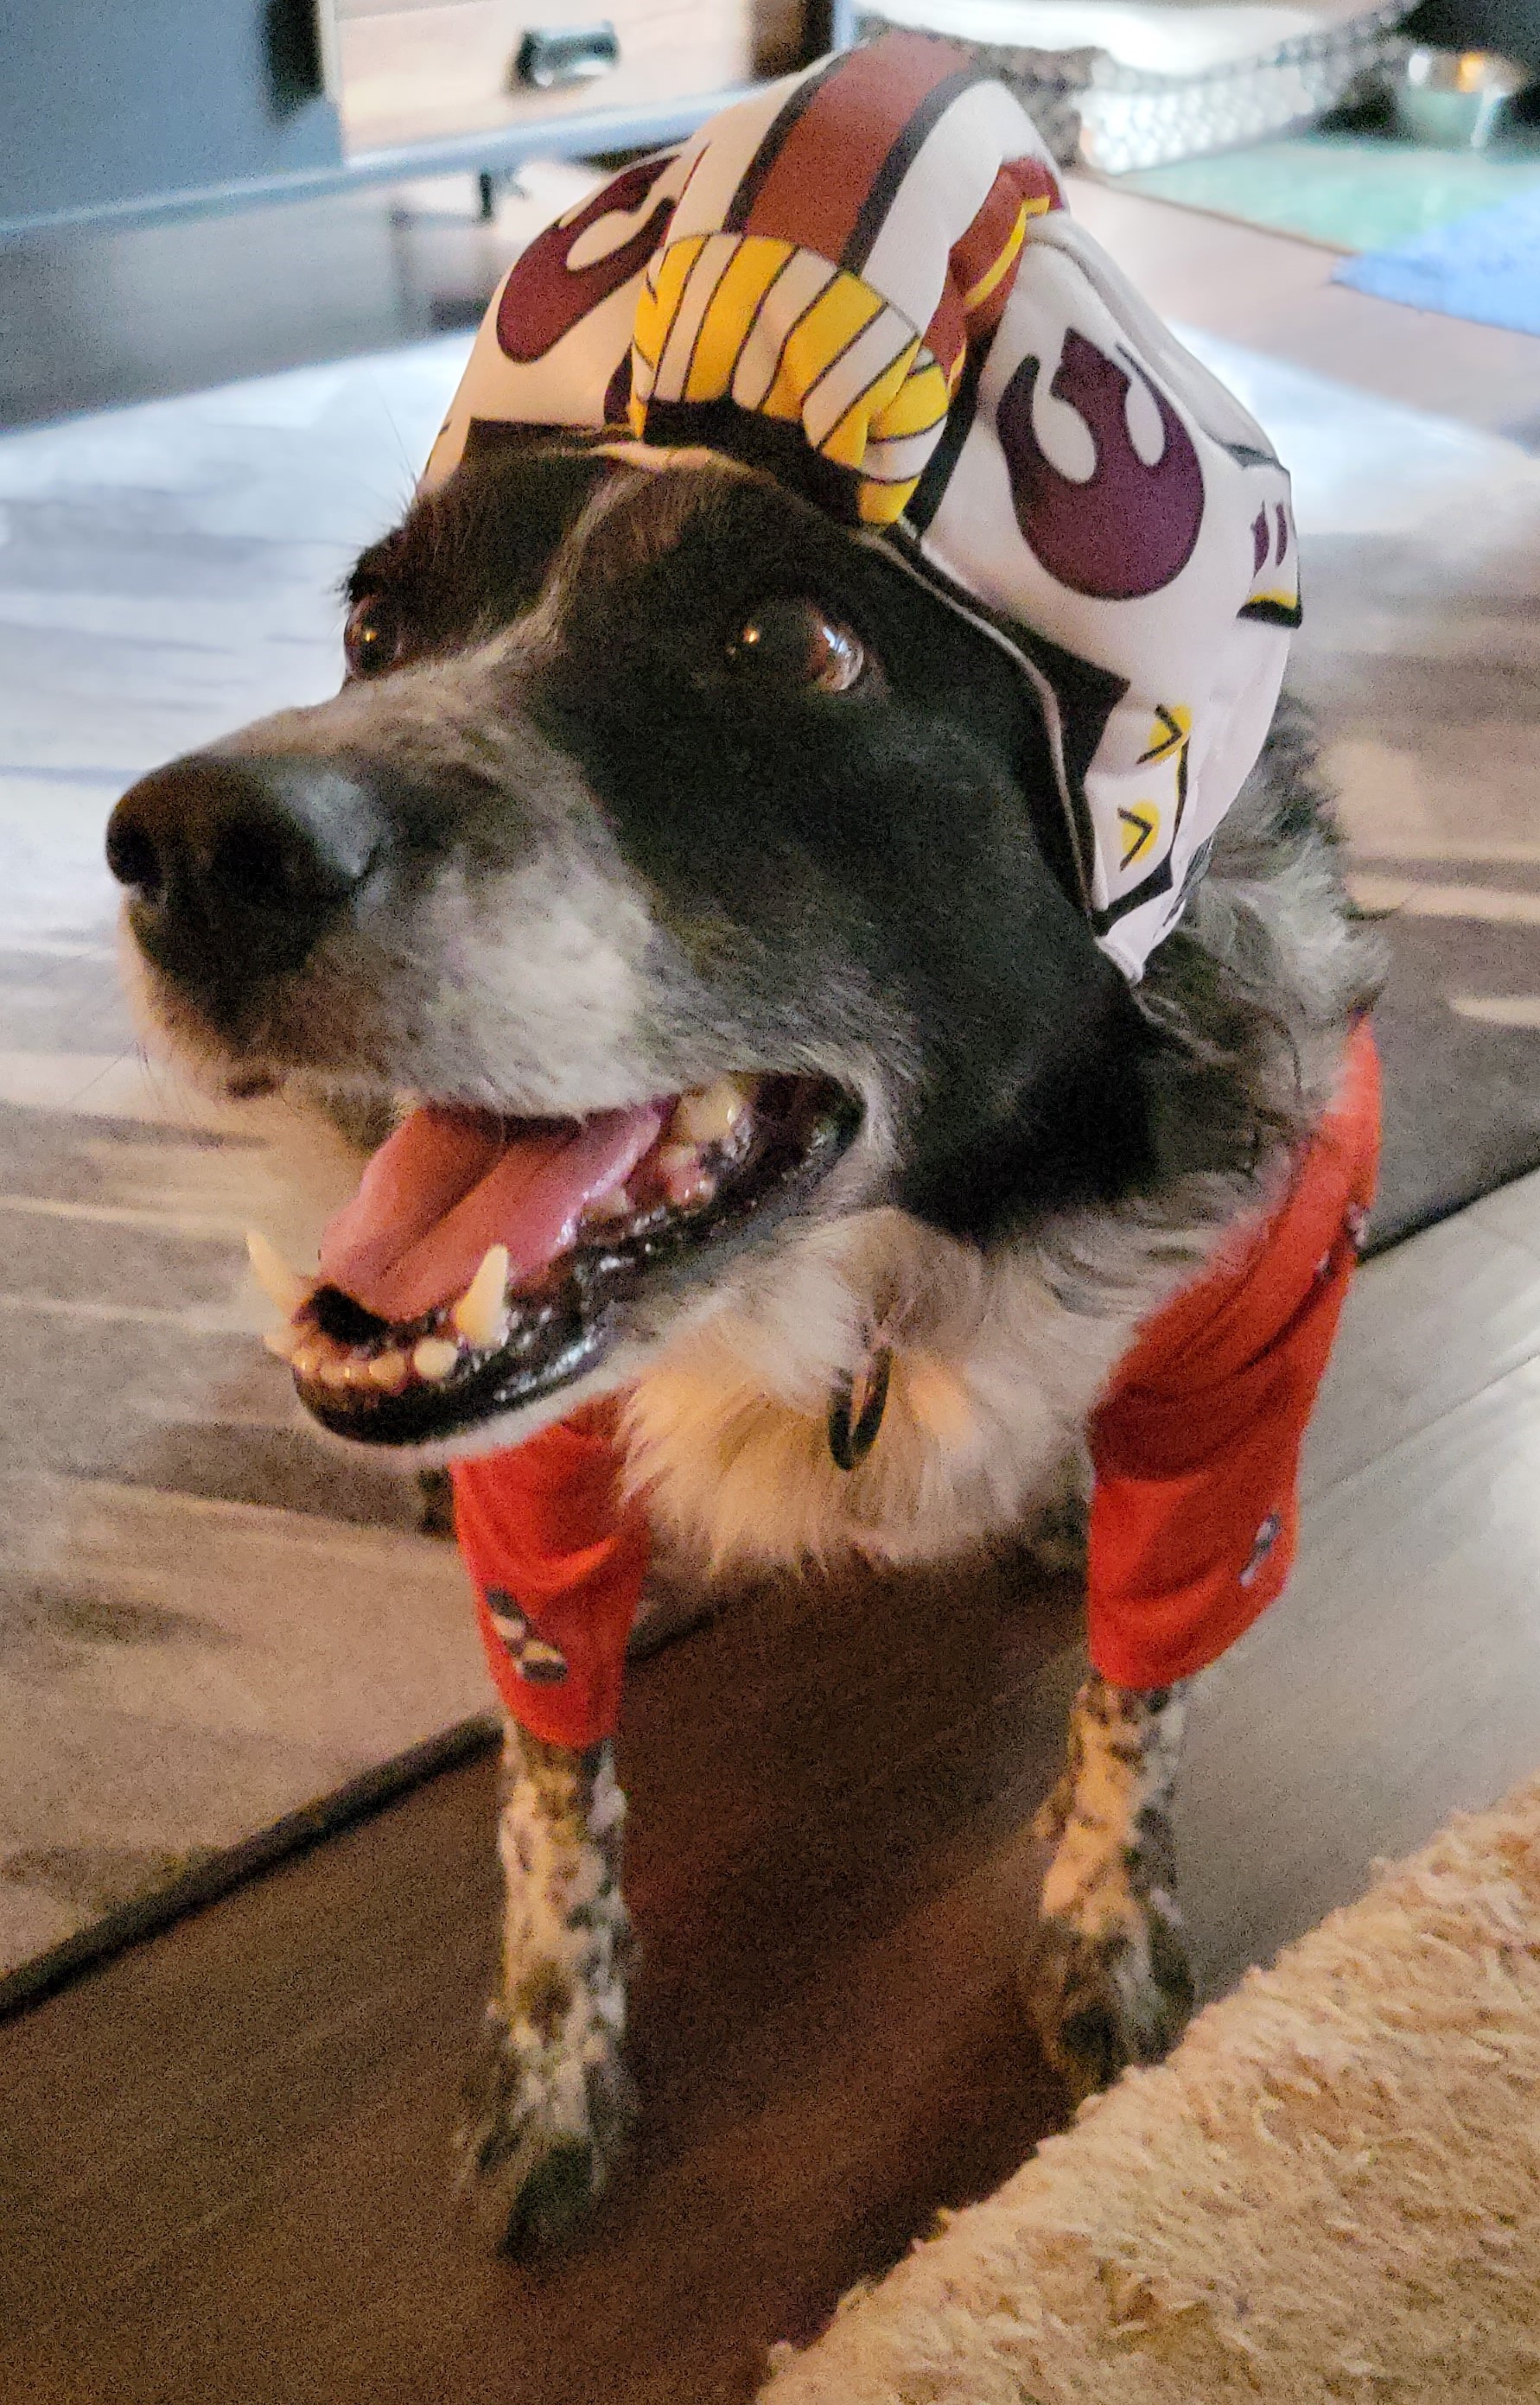 Photo of Laika, a black and white dog with speckled front legs and paws. She is posing for the camera and wearing her Resistance X-Wing Pilot helmet.